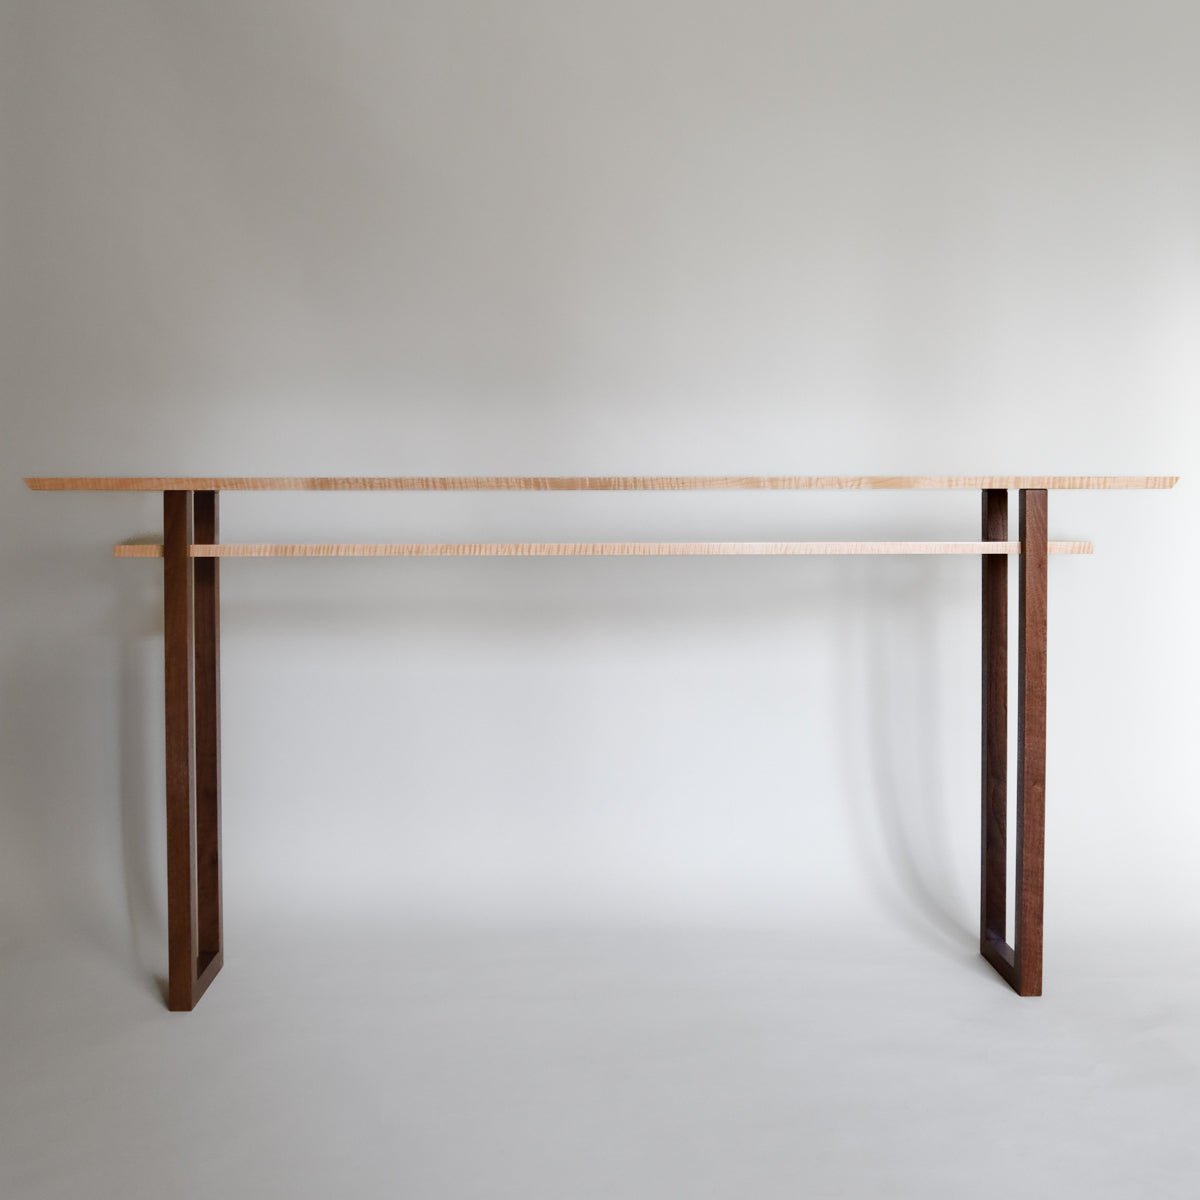 This minimalist console table is 72 inches long.